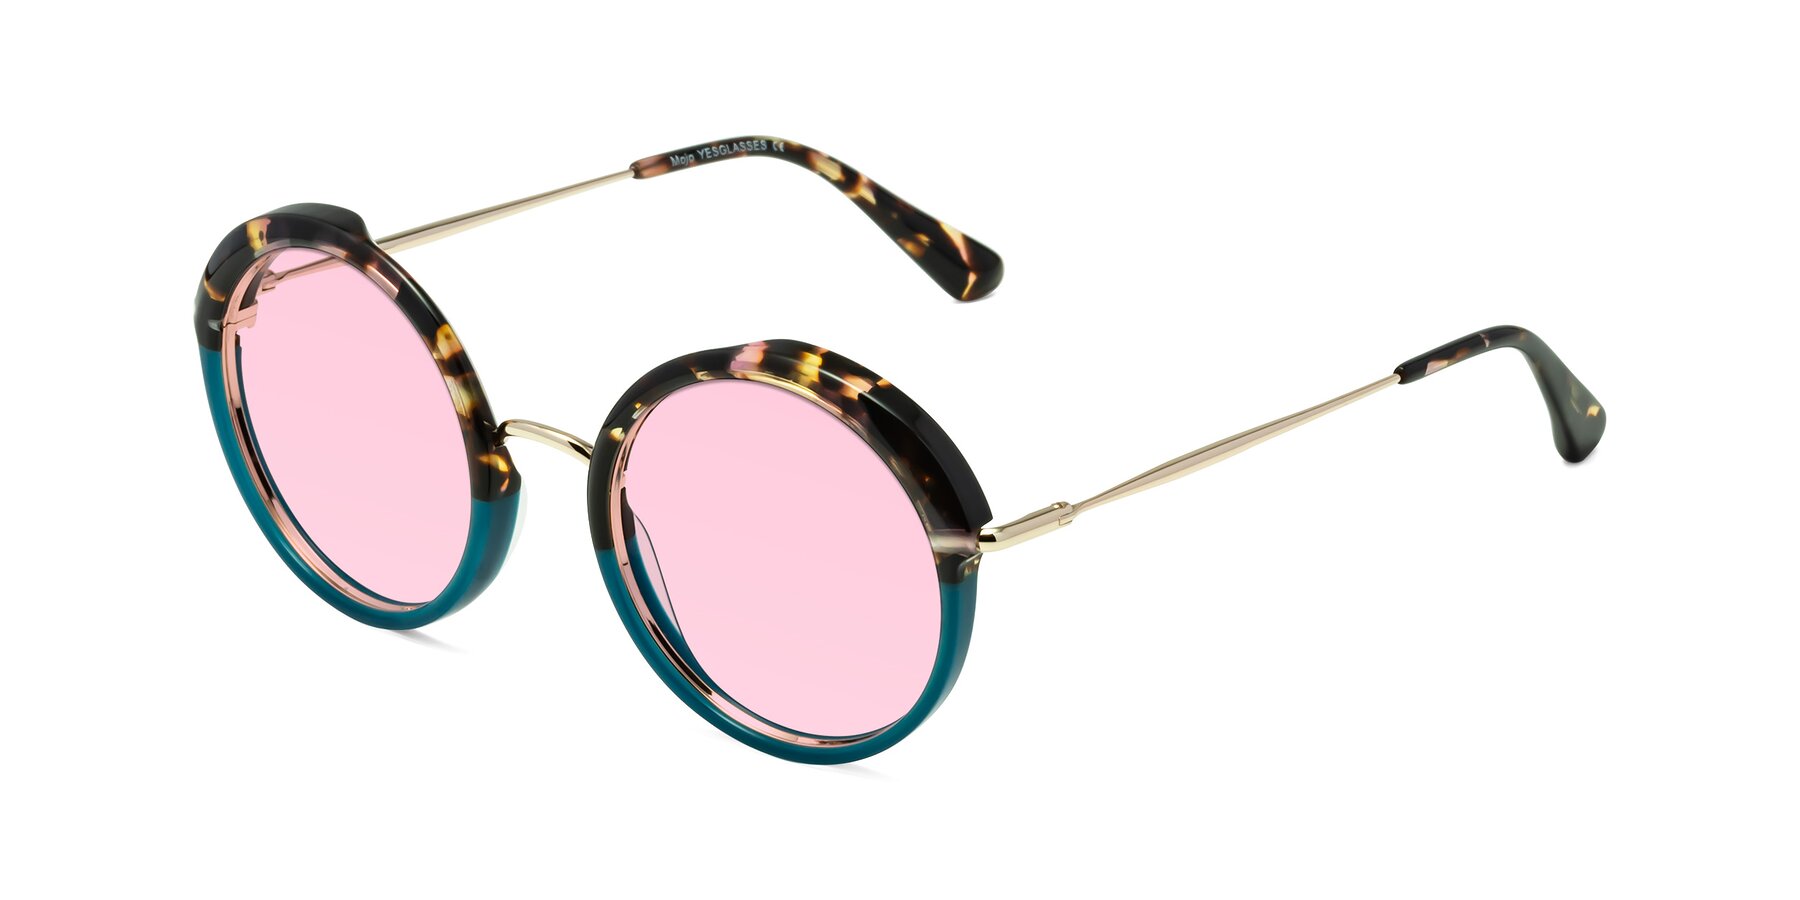 Angle of Mojo in Floral-Teal with Light Pink Tinted Lenses